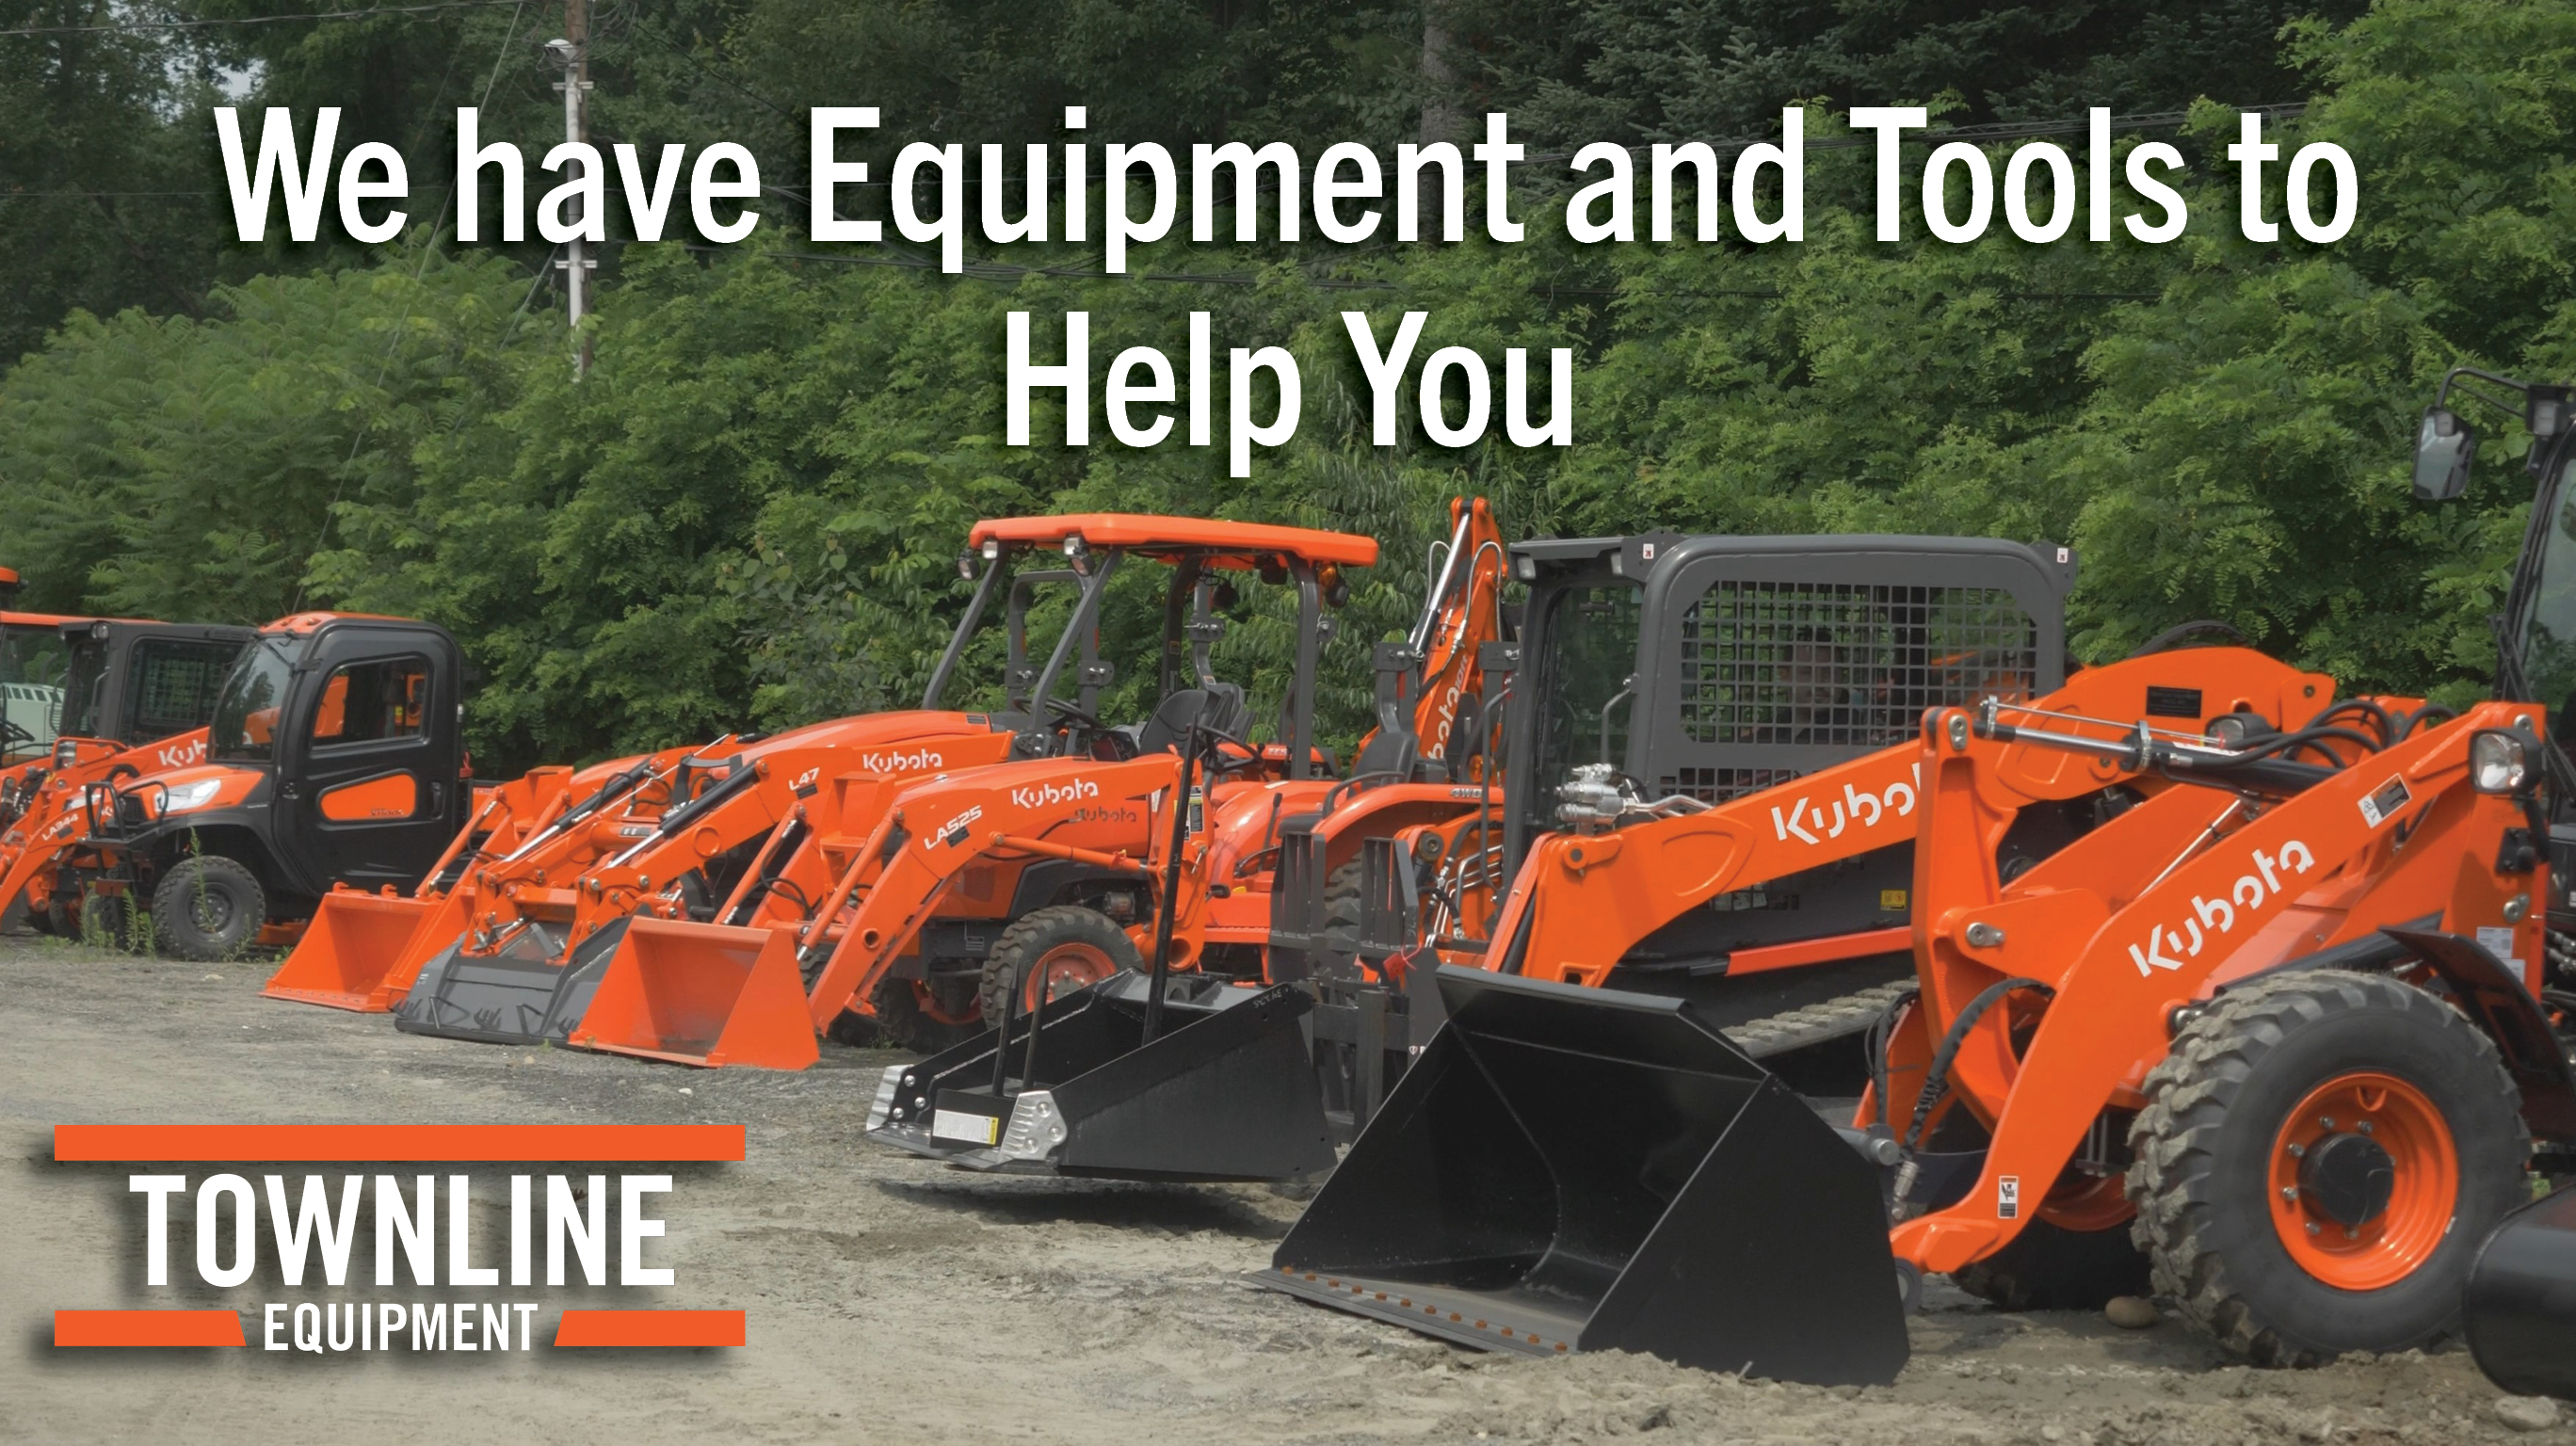 We have Equipment and Tools to help at Townline Equipment